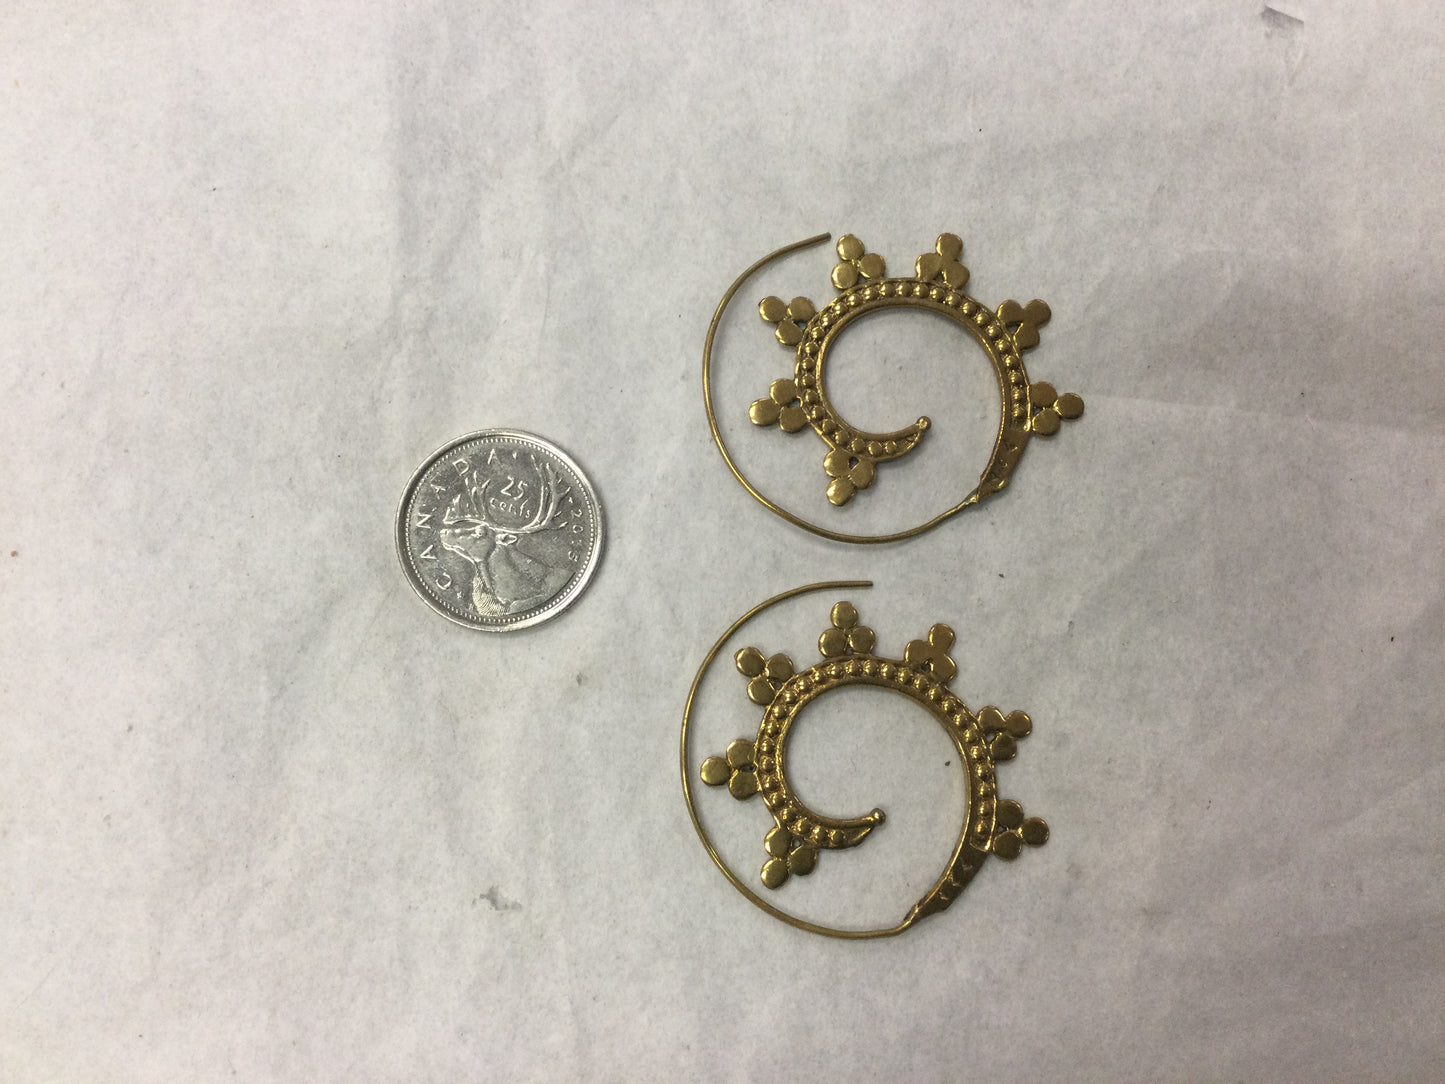 earrings, silver plate or brass, spiral with 3 petal design